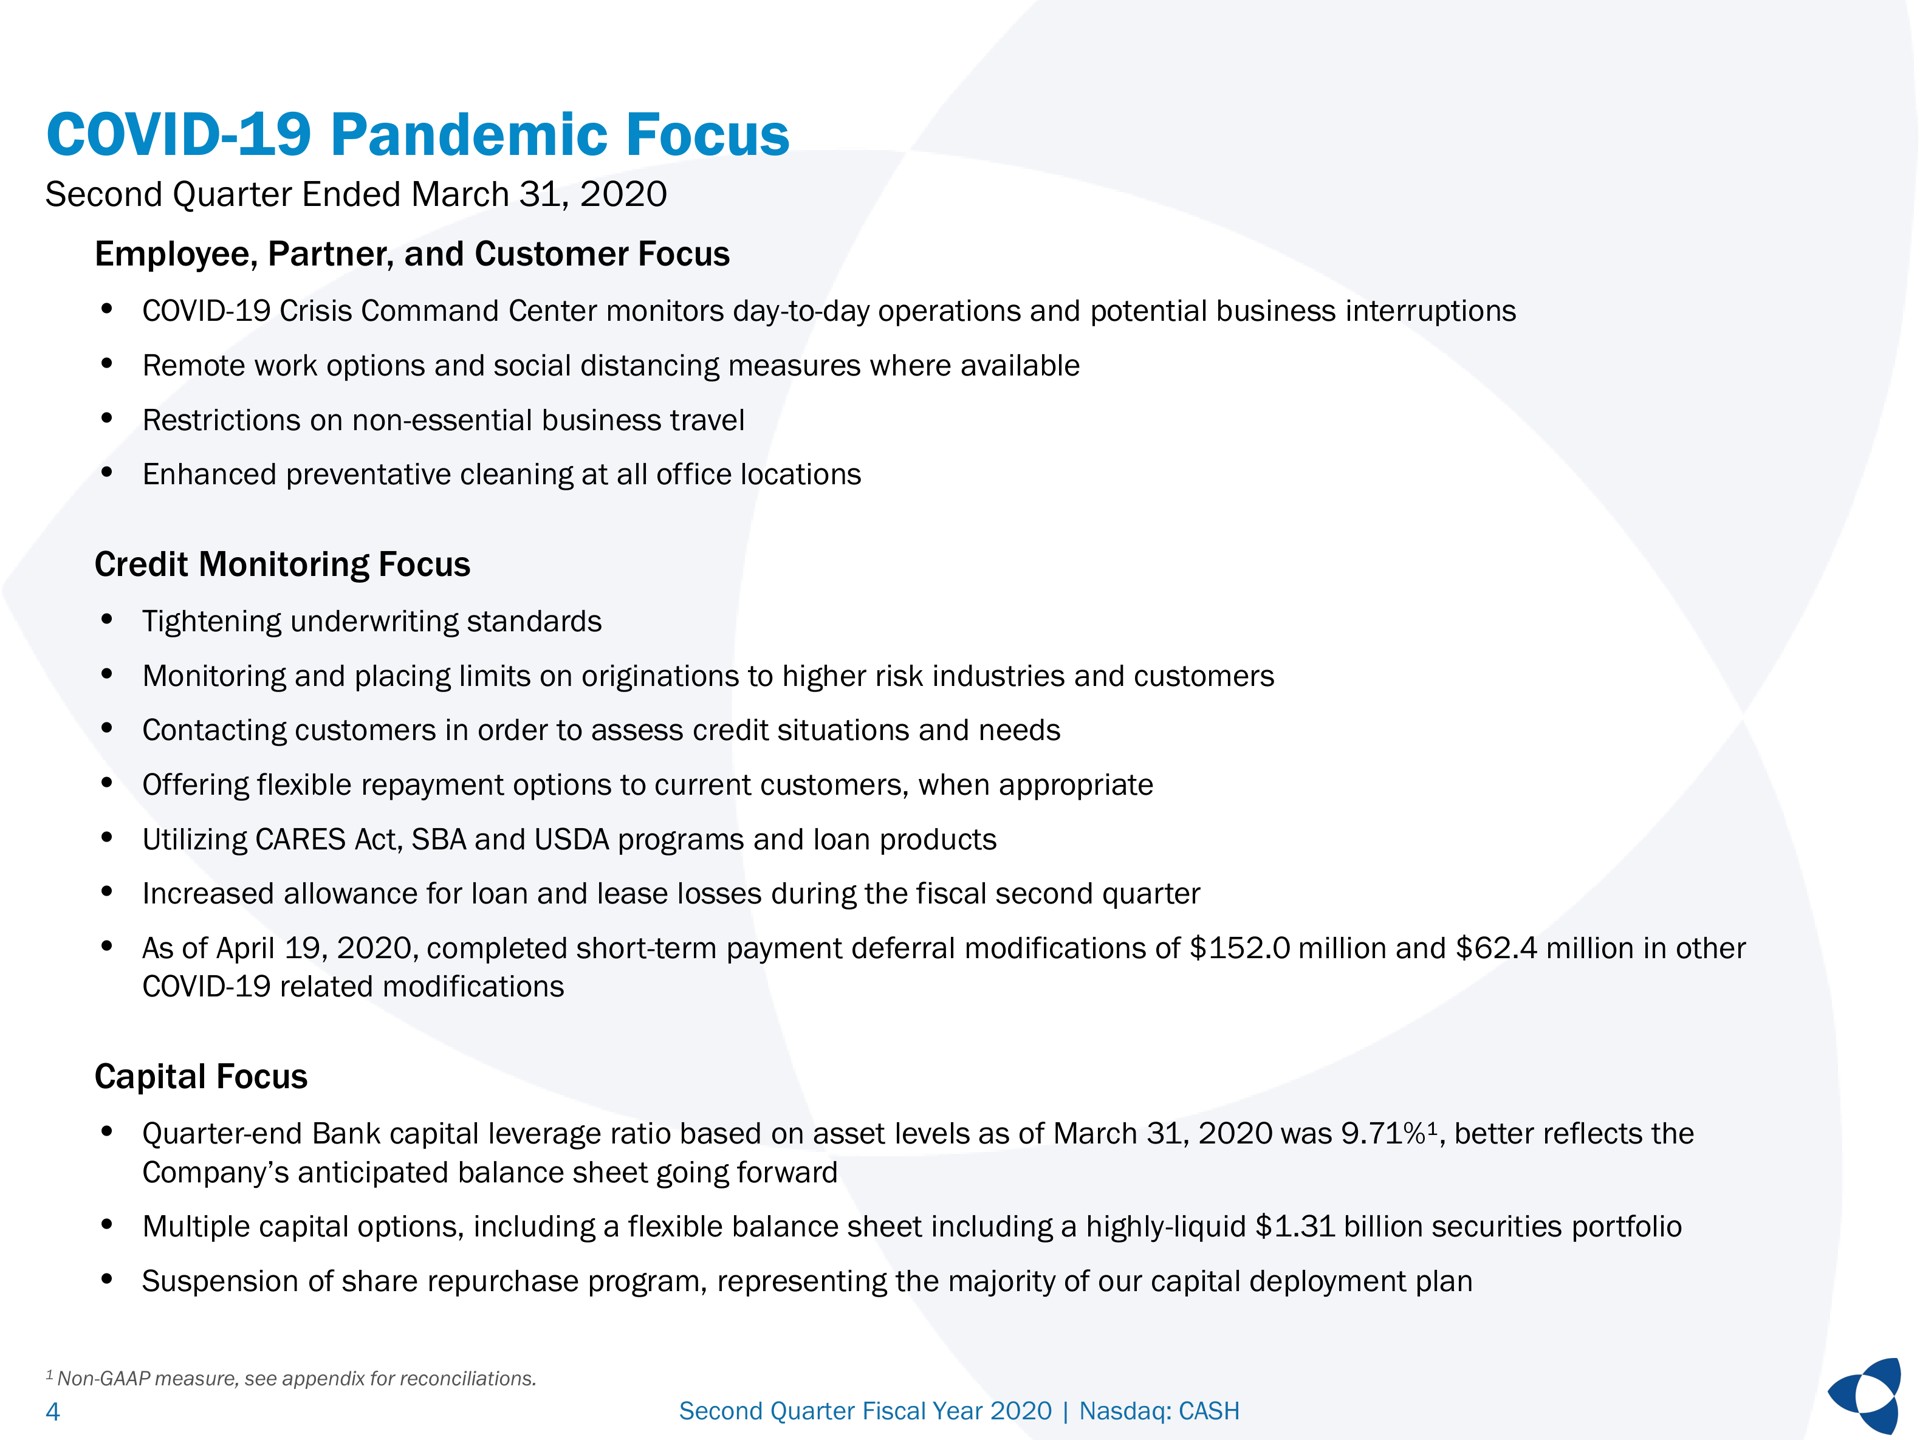 covid pandemic focus second quarter ended march employee partner and customer focus credit monitoring focus capital focus | Pathward Financial